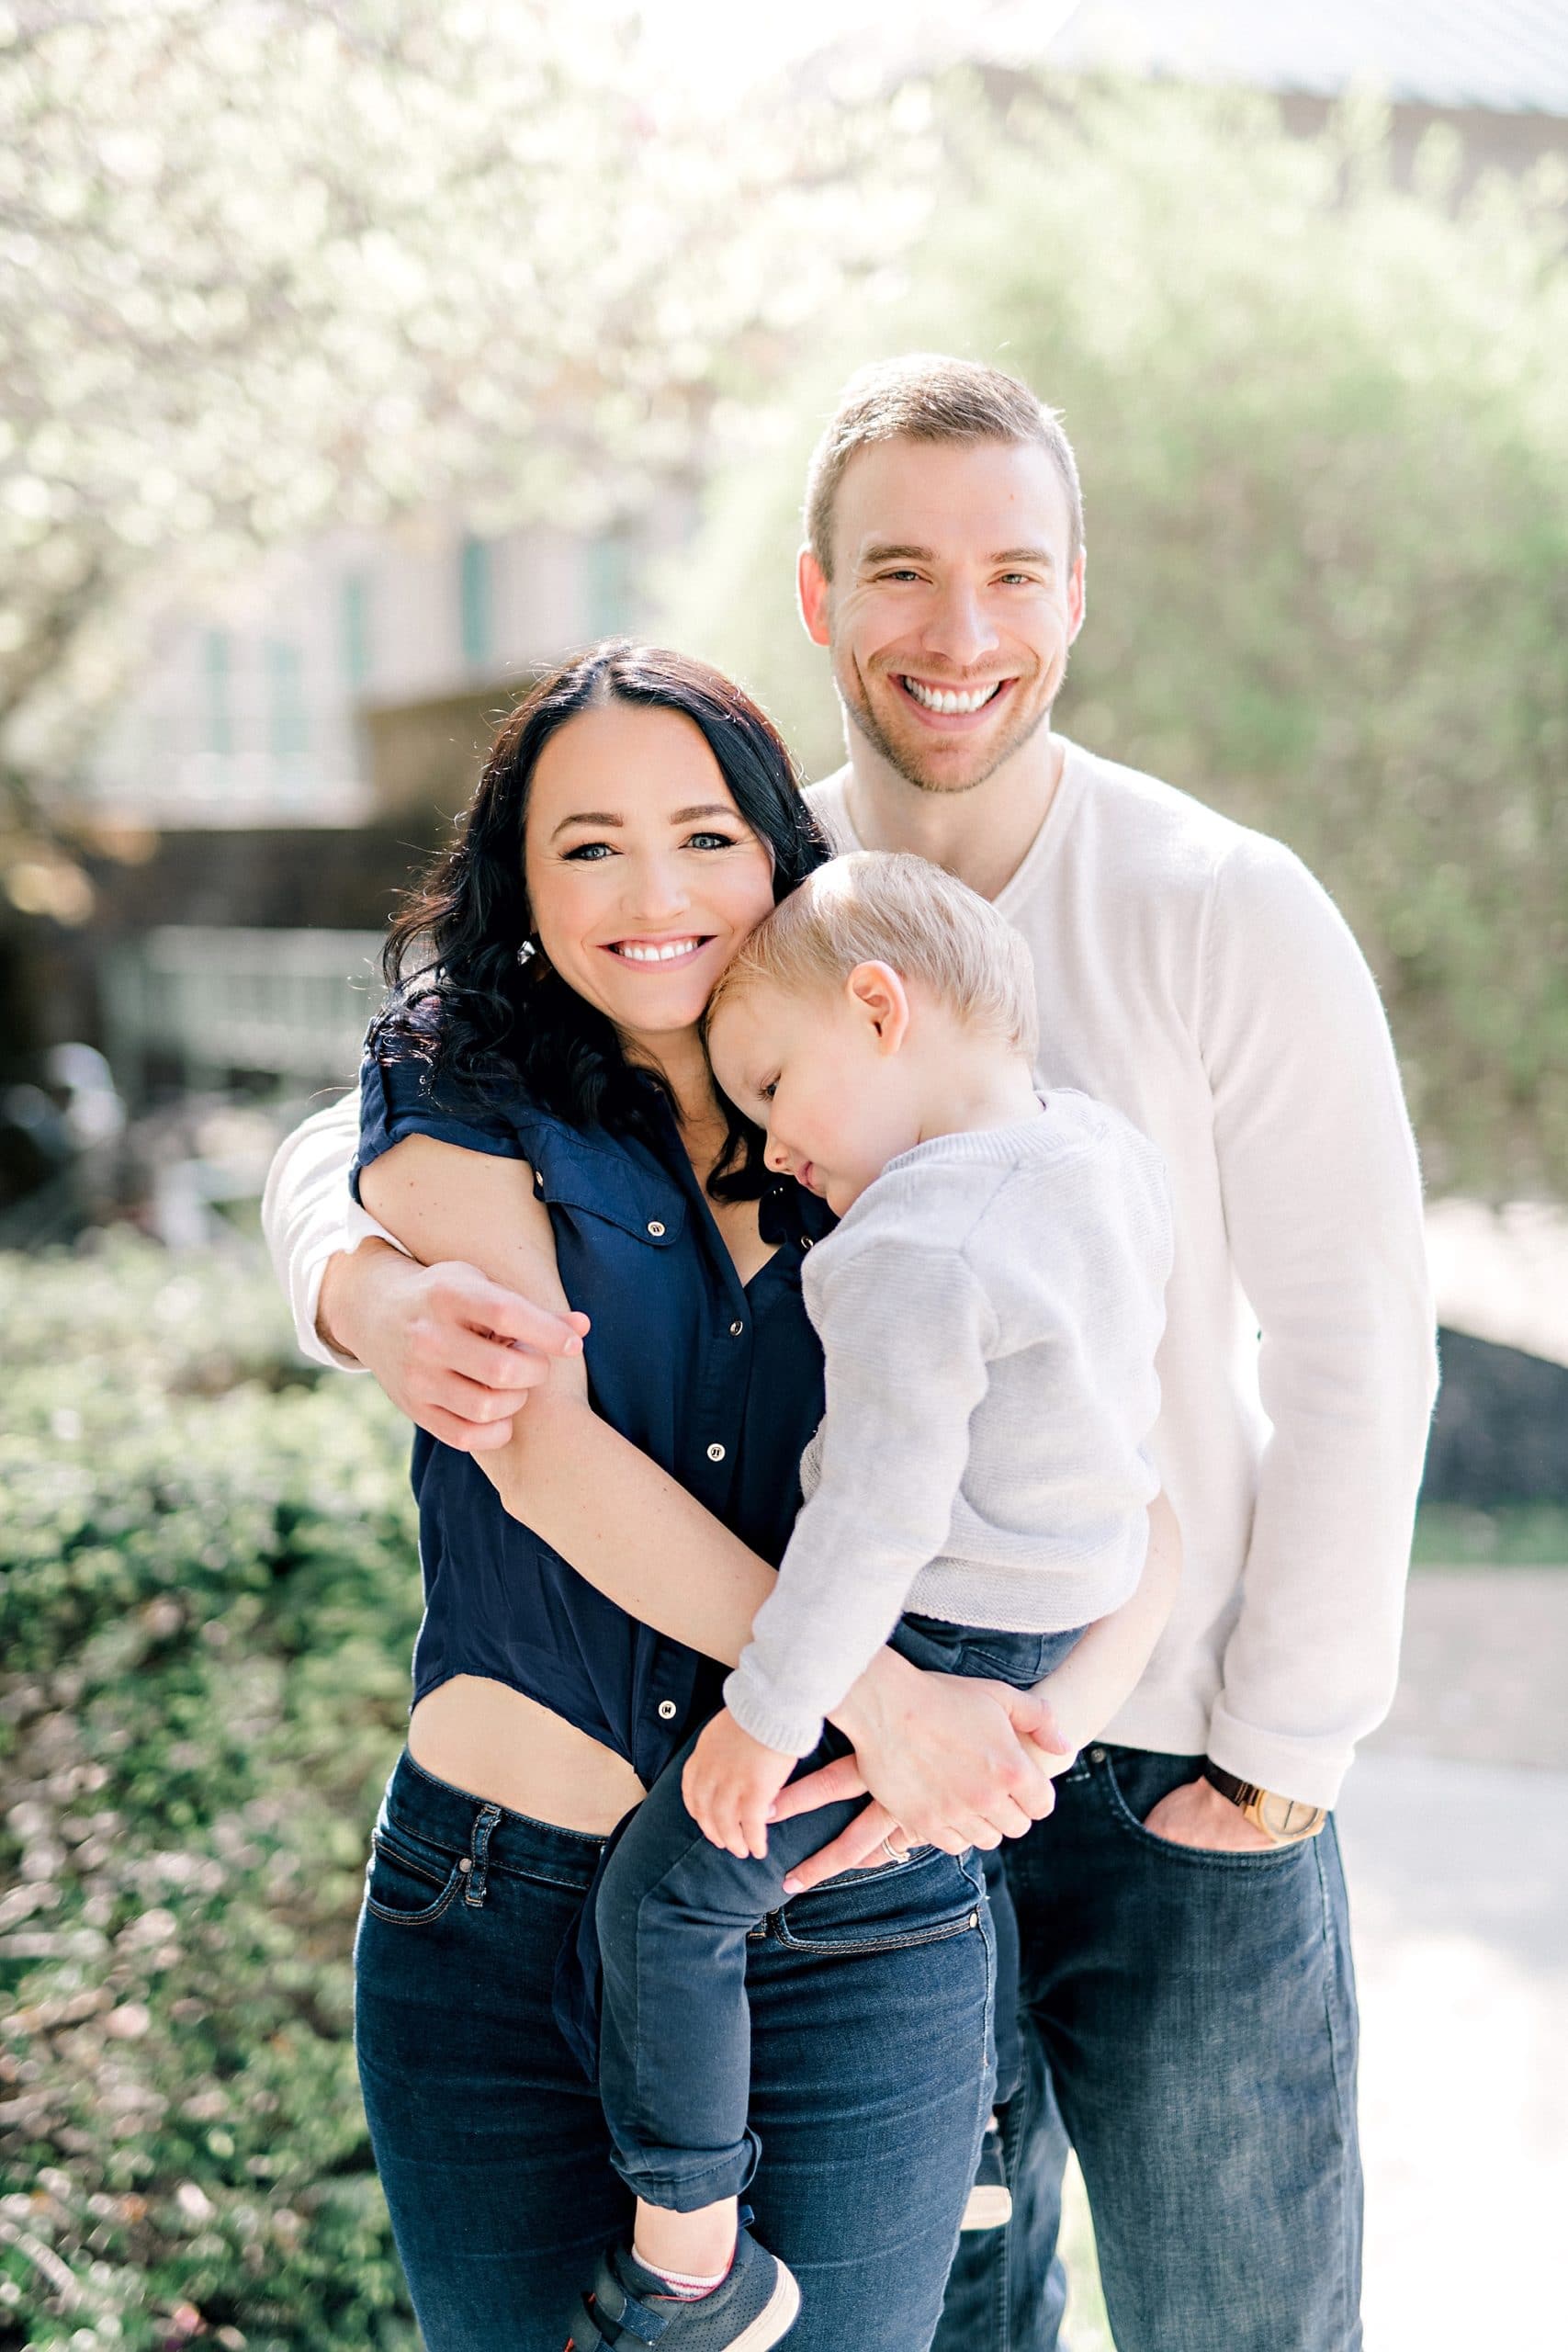 joy filled parents cuddling their little boy during a family portrait session